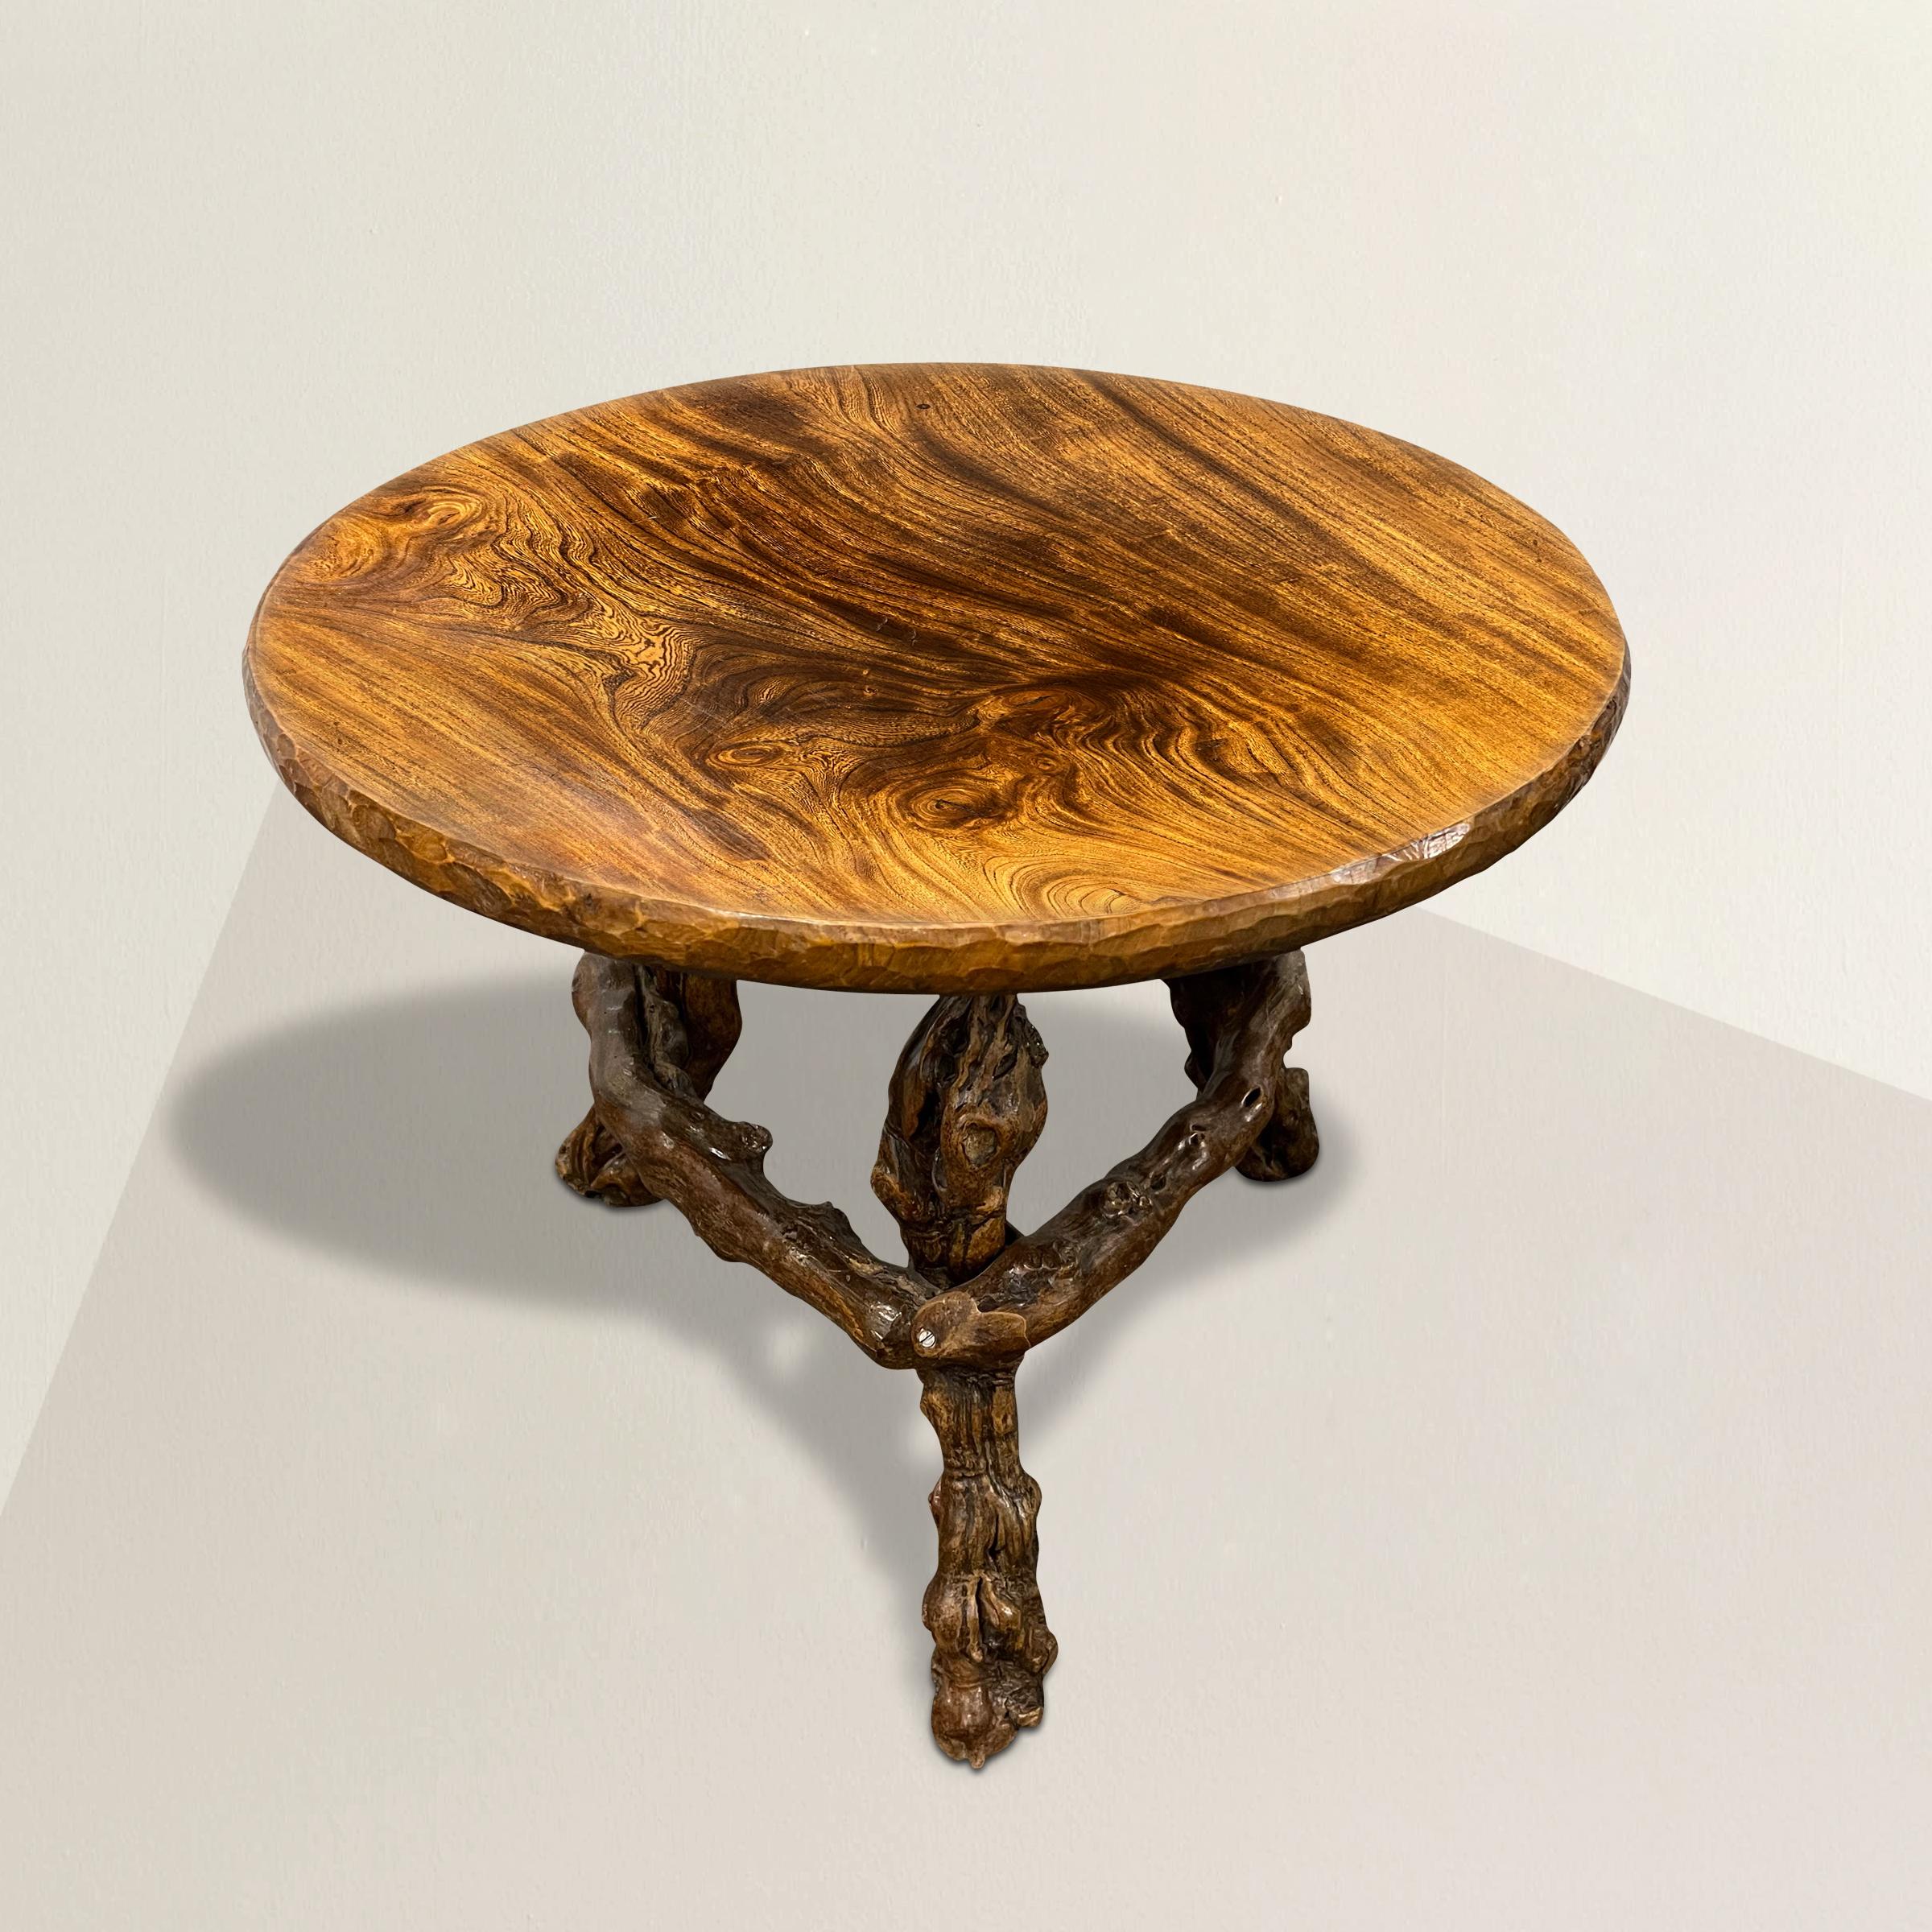 A wonderfully whimsical mid-20th century French table with a thick mahogany top with chip-carved edge detail, and supported by three burled grapevine legs connected with stretchers. The perfect side table next to a sofa or your favorite armchair, or